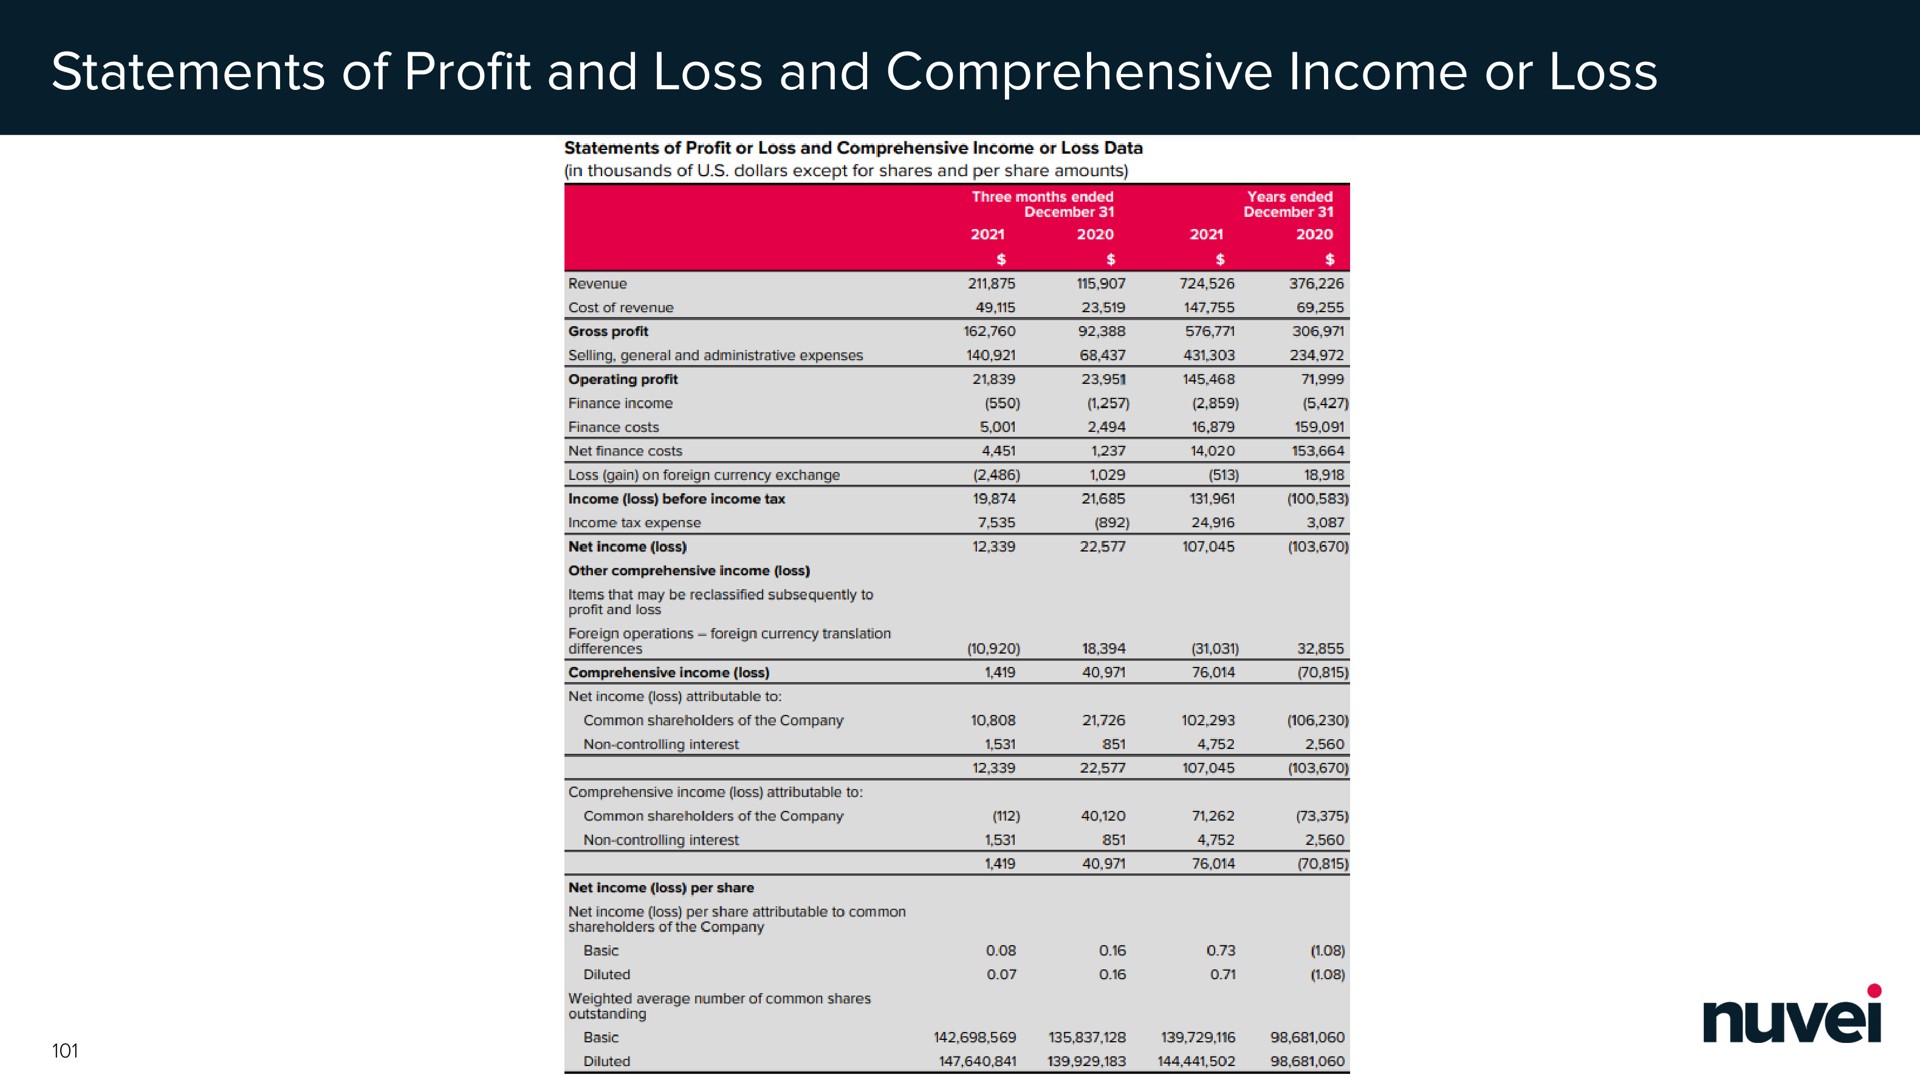 statements of profit and loss and comprehensive income or loss | Nuvei